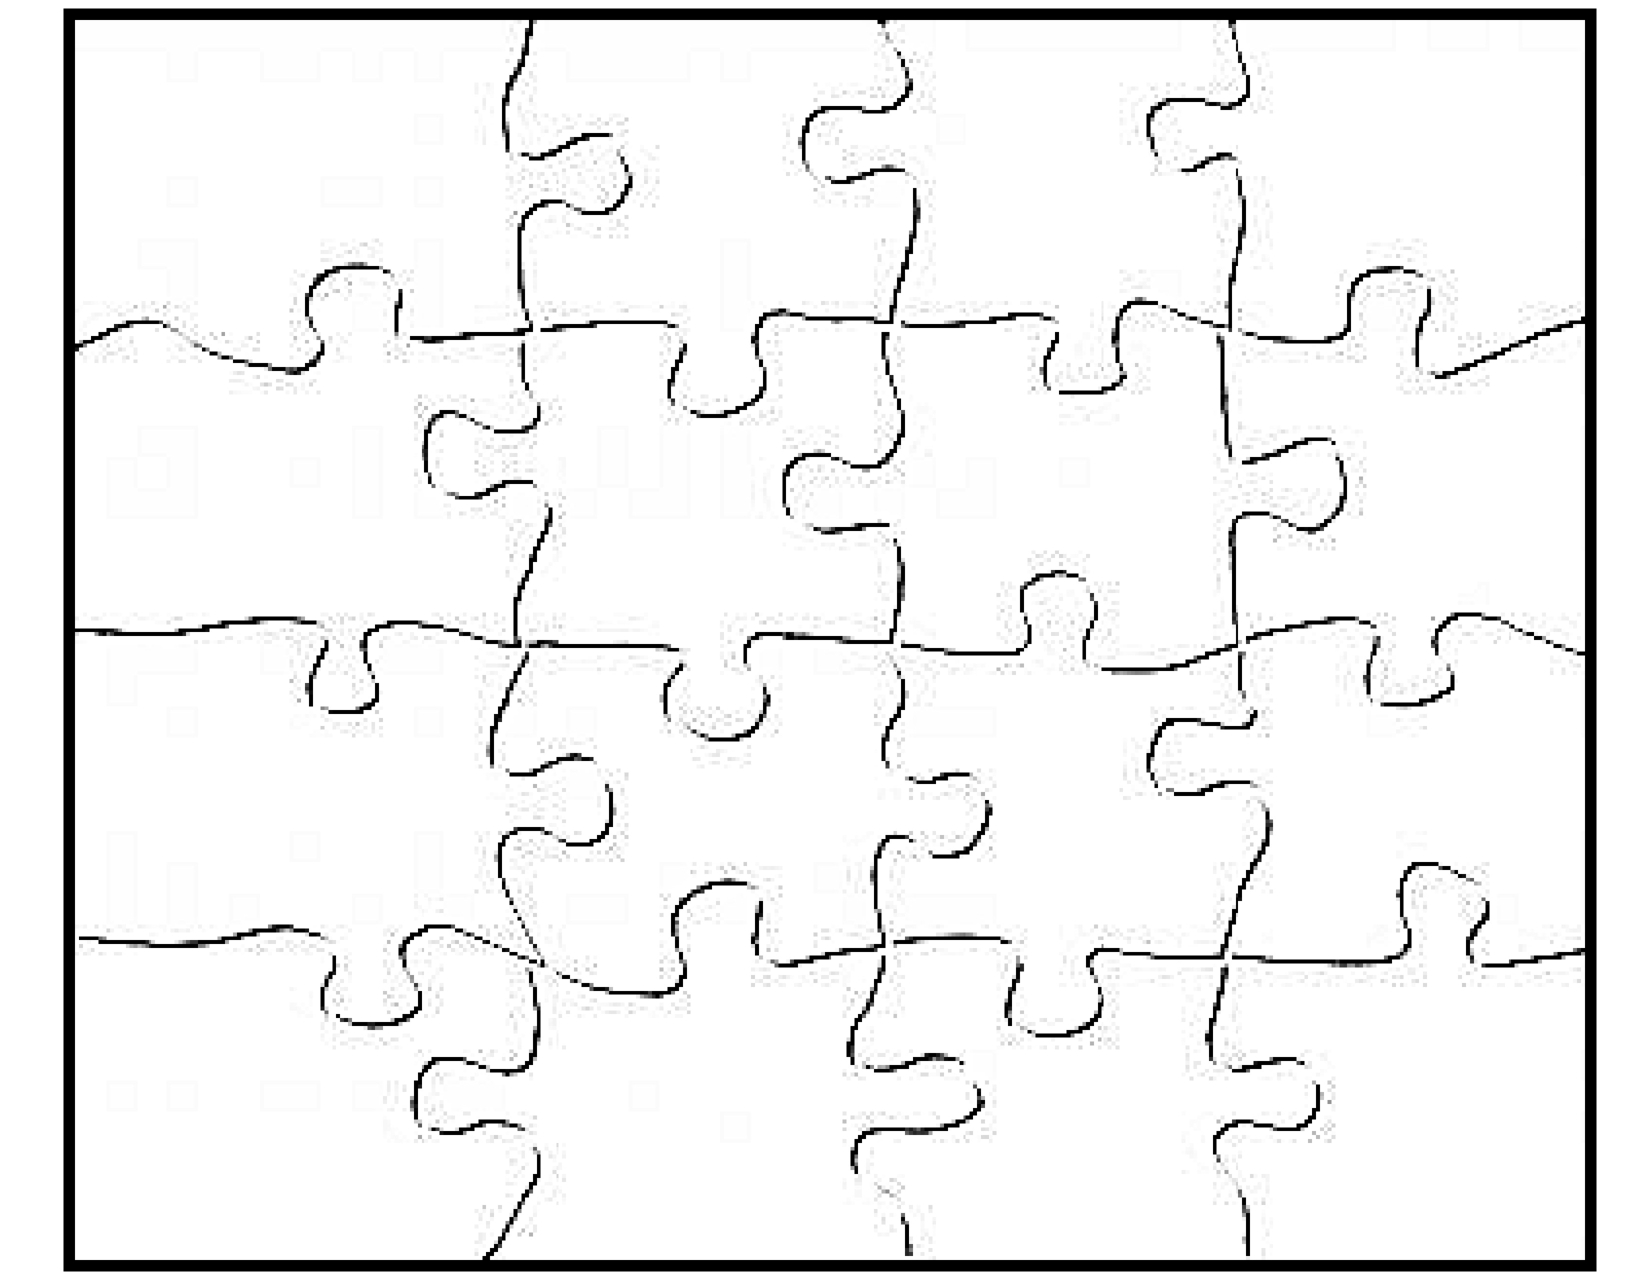 Free Puzzle Template, Download Free Clip Art, Free Clip Art On - Printable 9 Piece Puzzle